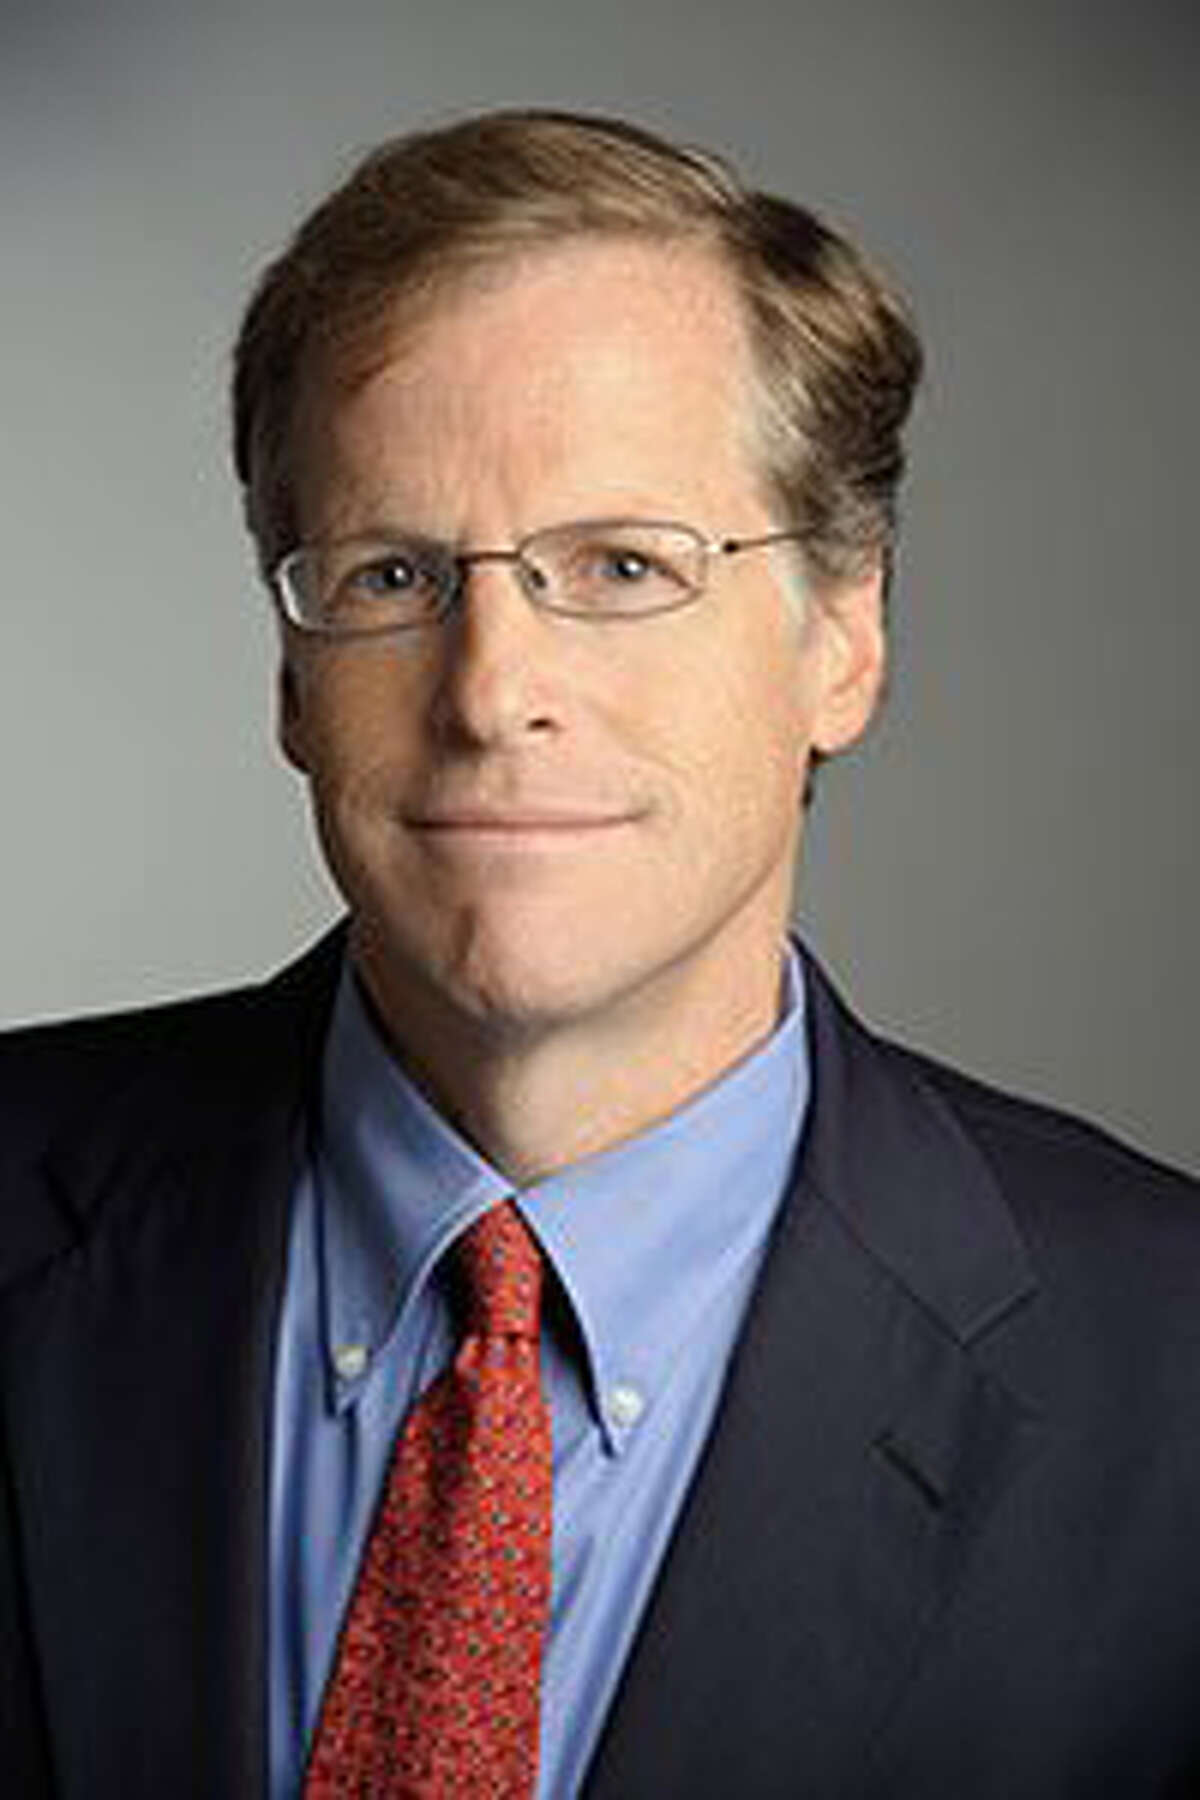 Quinnipiac University law professor Jeffrey Meyer, a former federal prosecutor, was nominated Friday, June 7th, 2013 by President Barack Obama to serve as a federal judge.